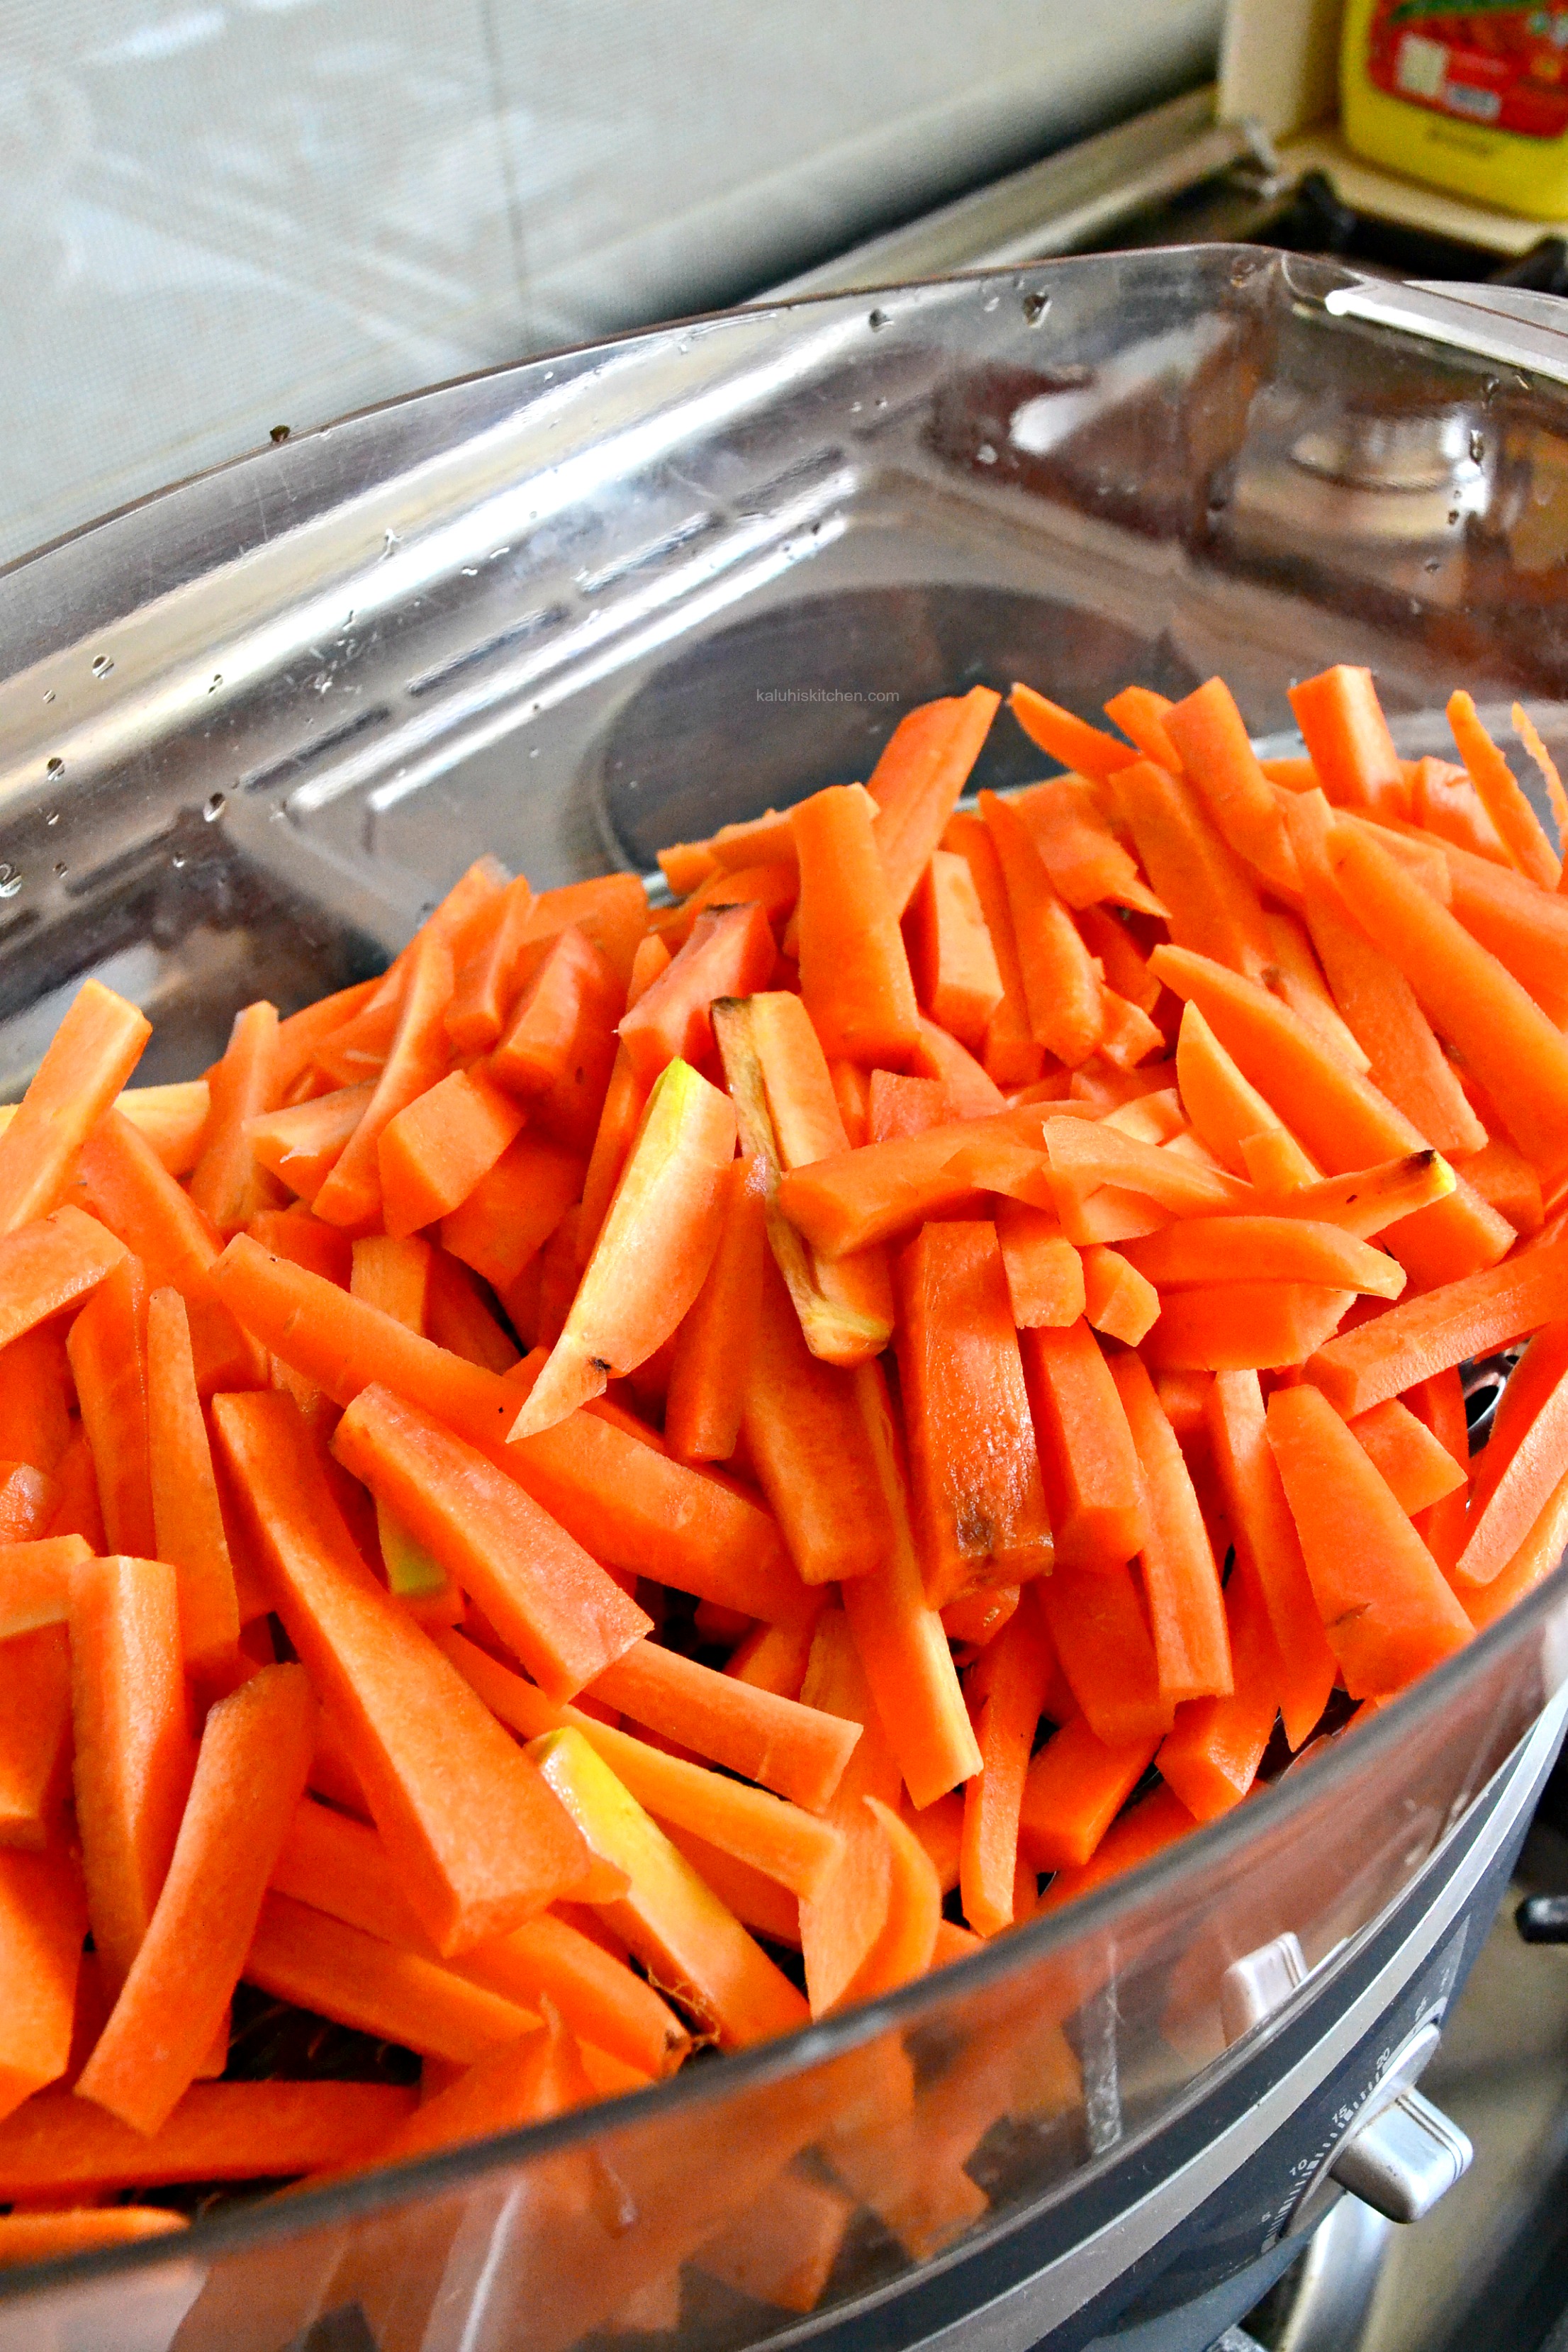 steam-youir-carrots-until-theyare-halfway-done-so-that-plenty-of-the-nutrients-are-preservedkaluhiskitchen-com